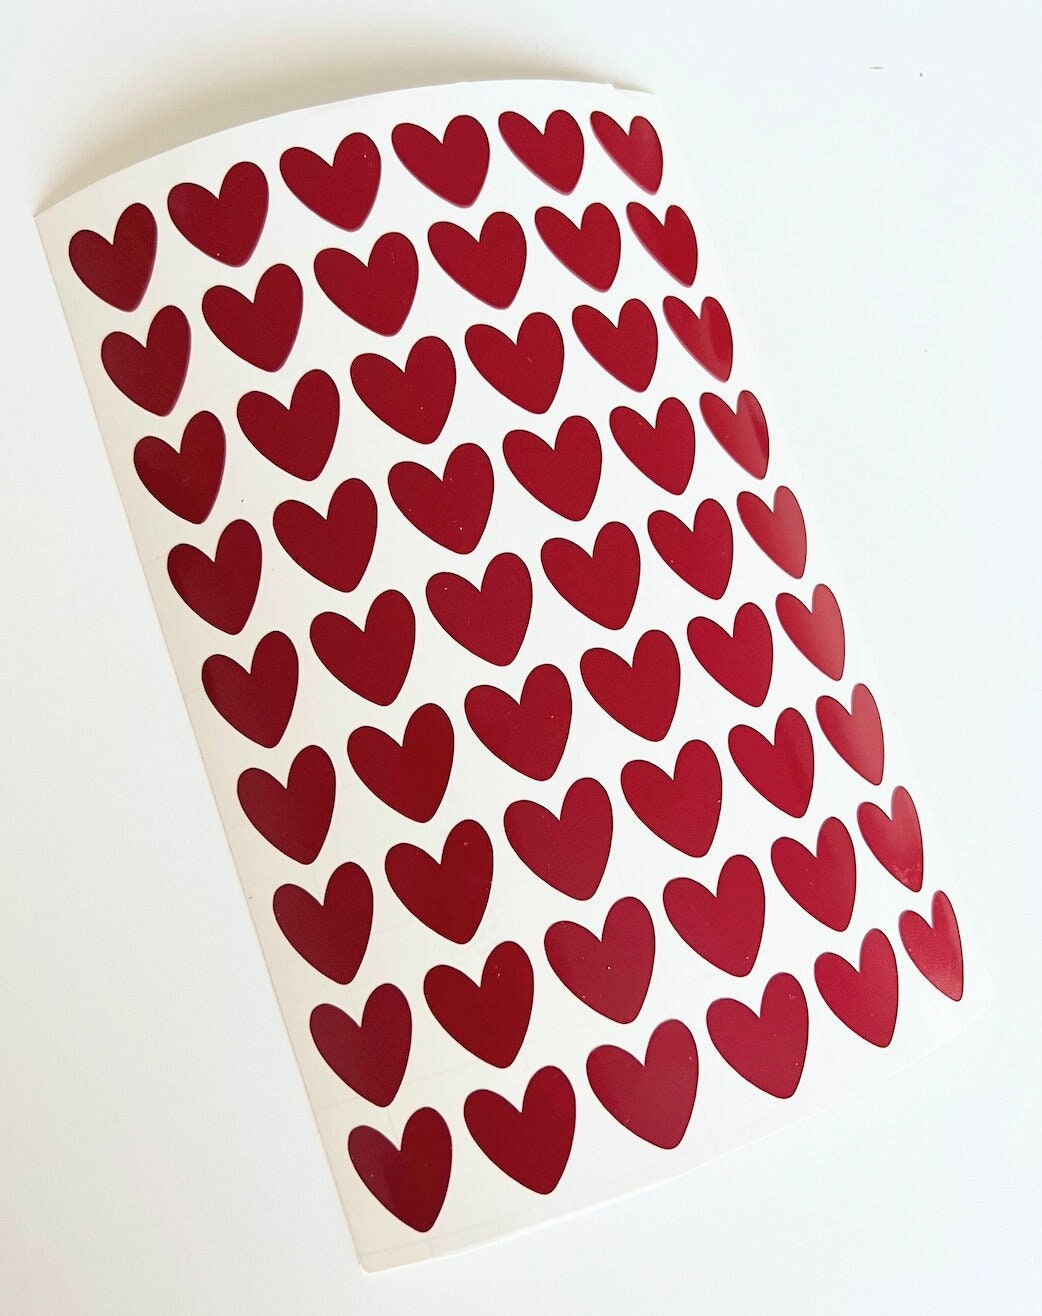 BLMHTWO 1680 Counts Heart Stickers Small Heart Stickers for Kids Colorful  Self Adhesive Heart Decorative Sticker Sheet Reward Stickers for Scrapbook